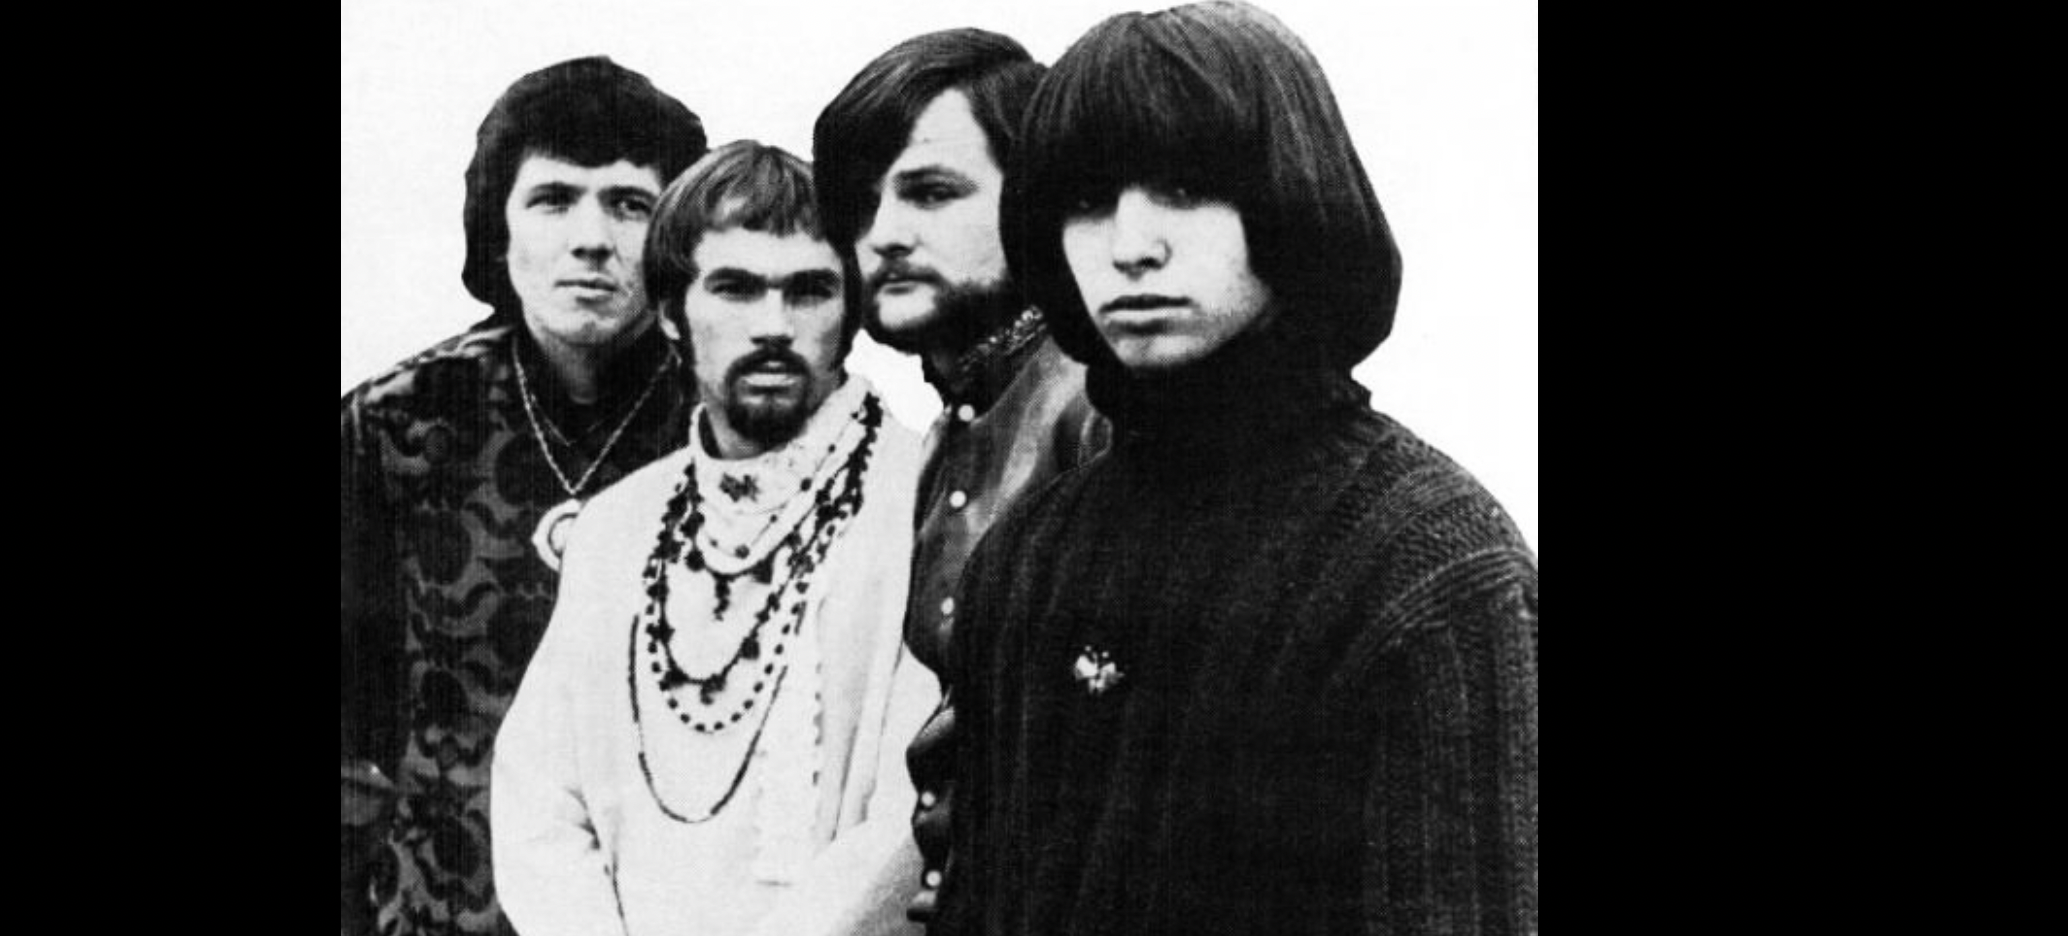 <p>Iron Butterfly made some great music, but they remain best known for the song  "In-A-Gadda-Da-Vida," which went on for over 17 minutes. The title derives from lead singer and songwriter Doug Ingle trying to sing “In the Garden of Eden” while inebriated.</p>